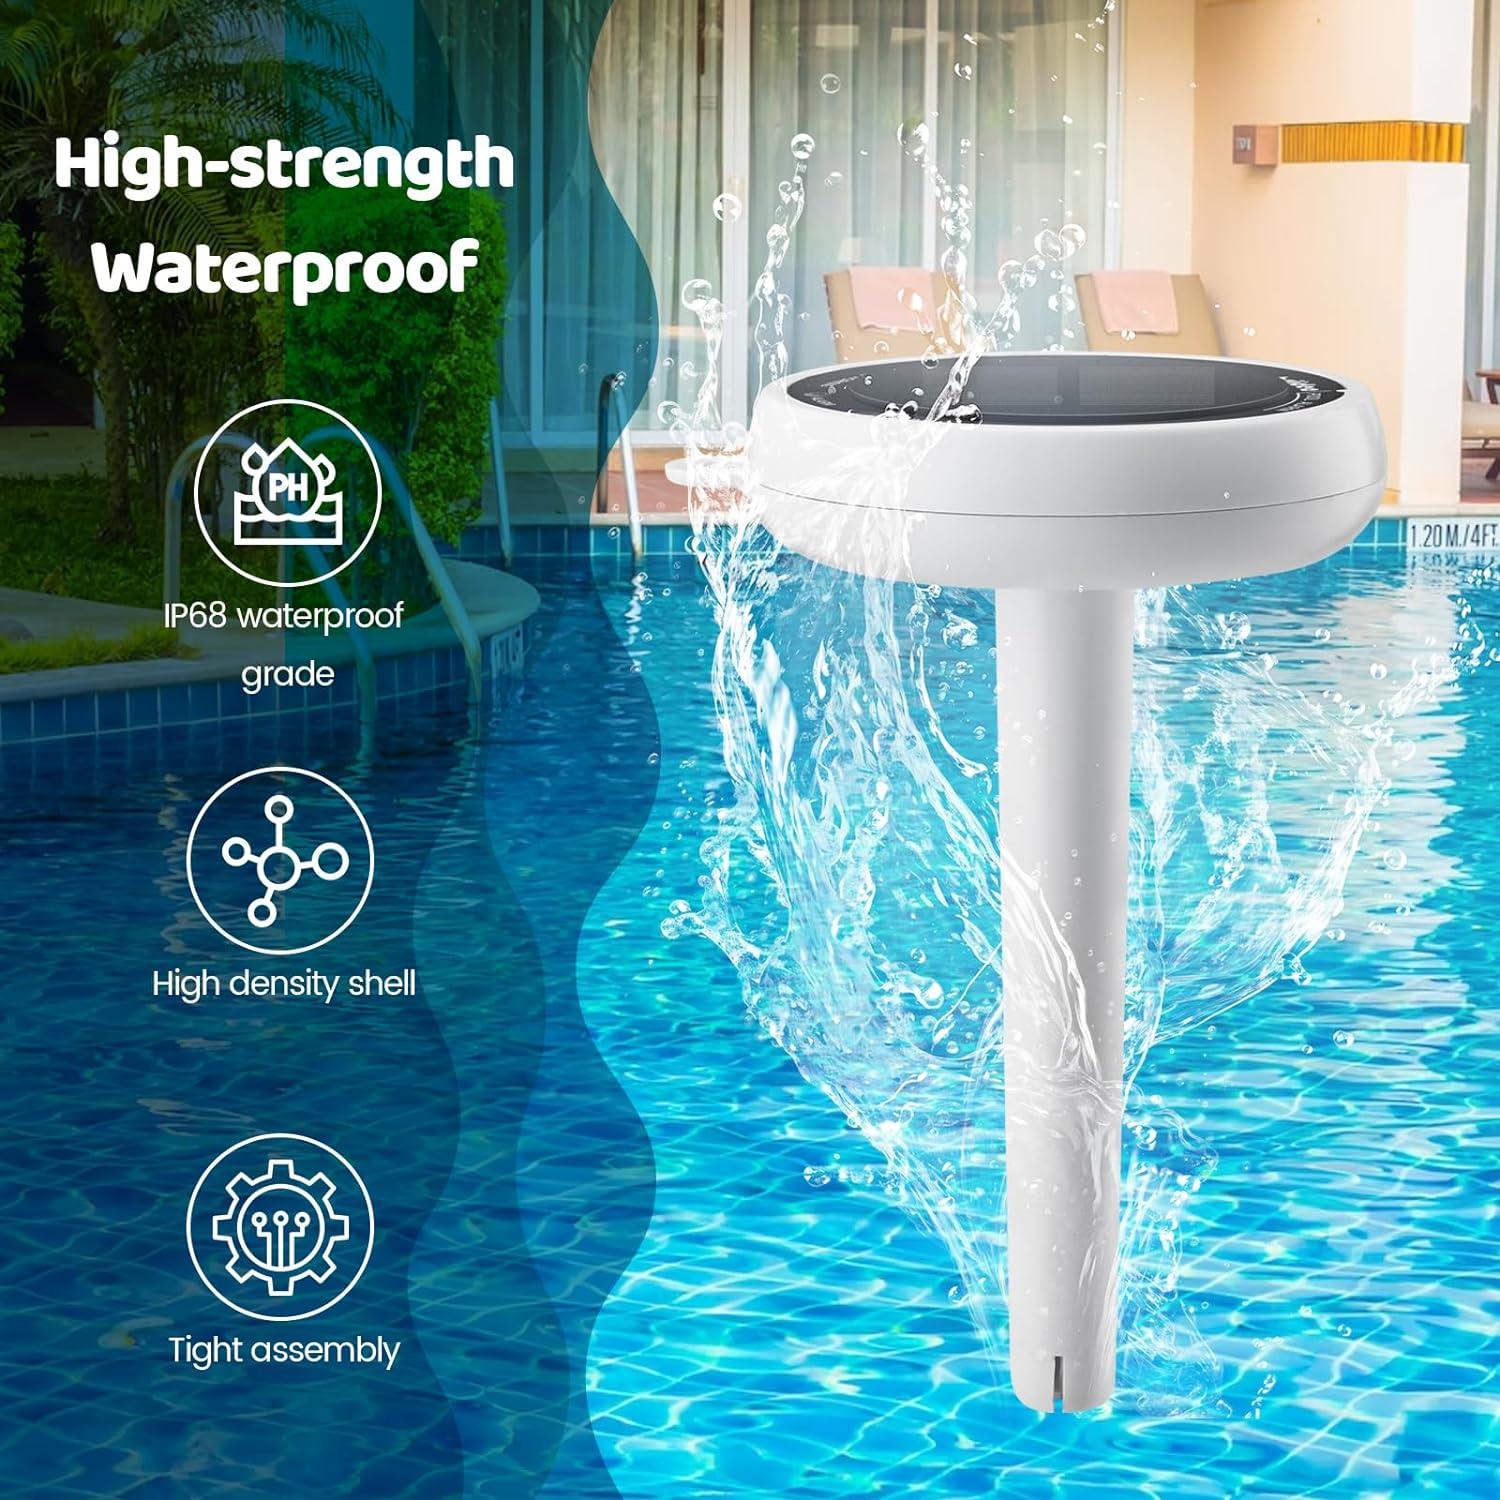 Pool Alarm, Briidea Solar Wave Alarm with Optimal Sensitivity Deployment, Combined with Indoor and Outdoor Devices for Dual Alarming, Providing Extra Protection for Your Child and Pet - briidea